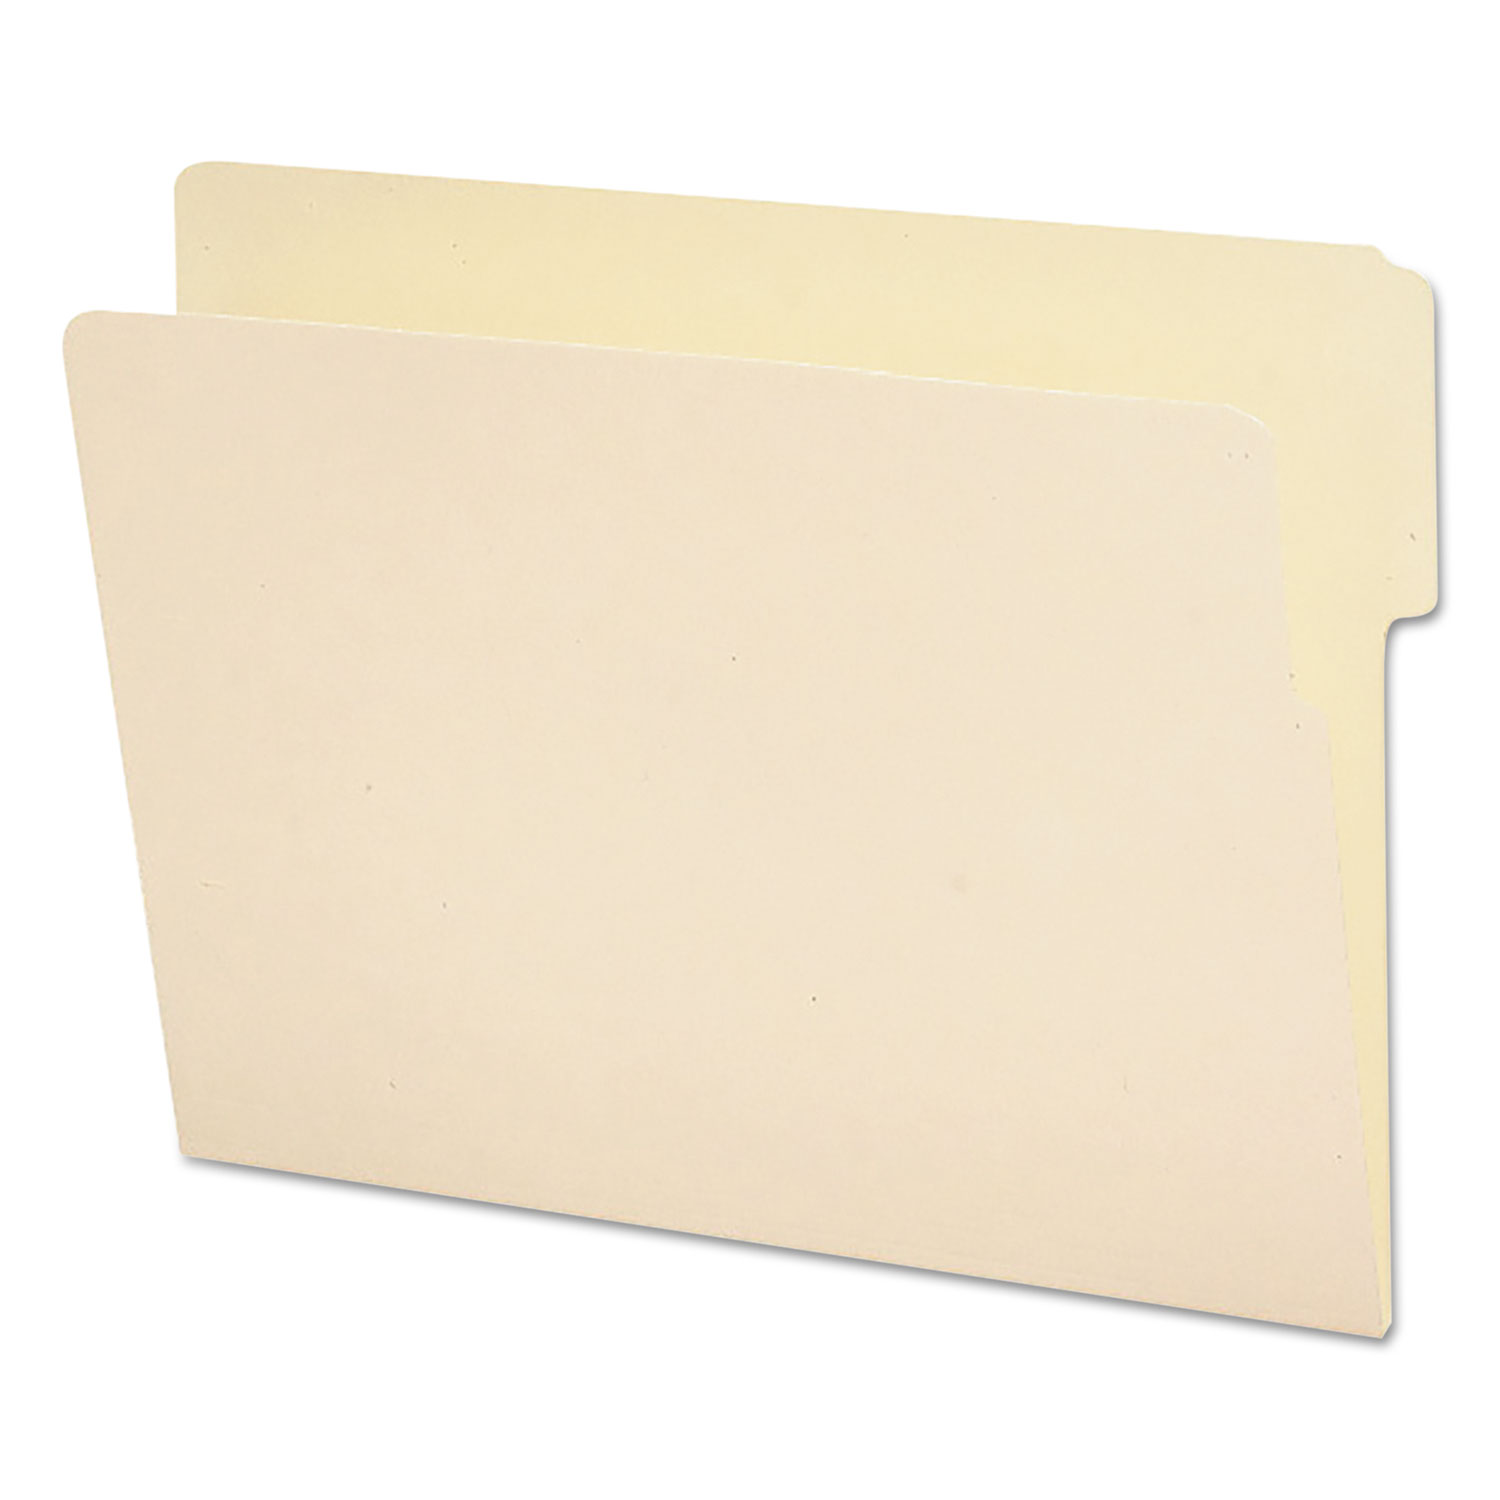  Smead 24135 Heavyweight Manila End Tab Folders, 9 Front, 1/3-Cut Tabs, Top Position, Letter Size, 100/Box (SMD24135) 